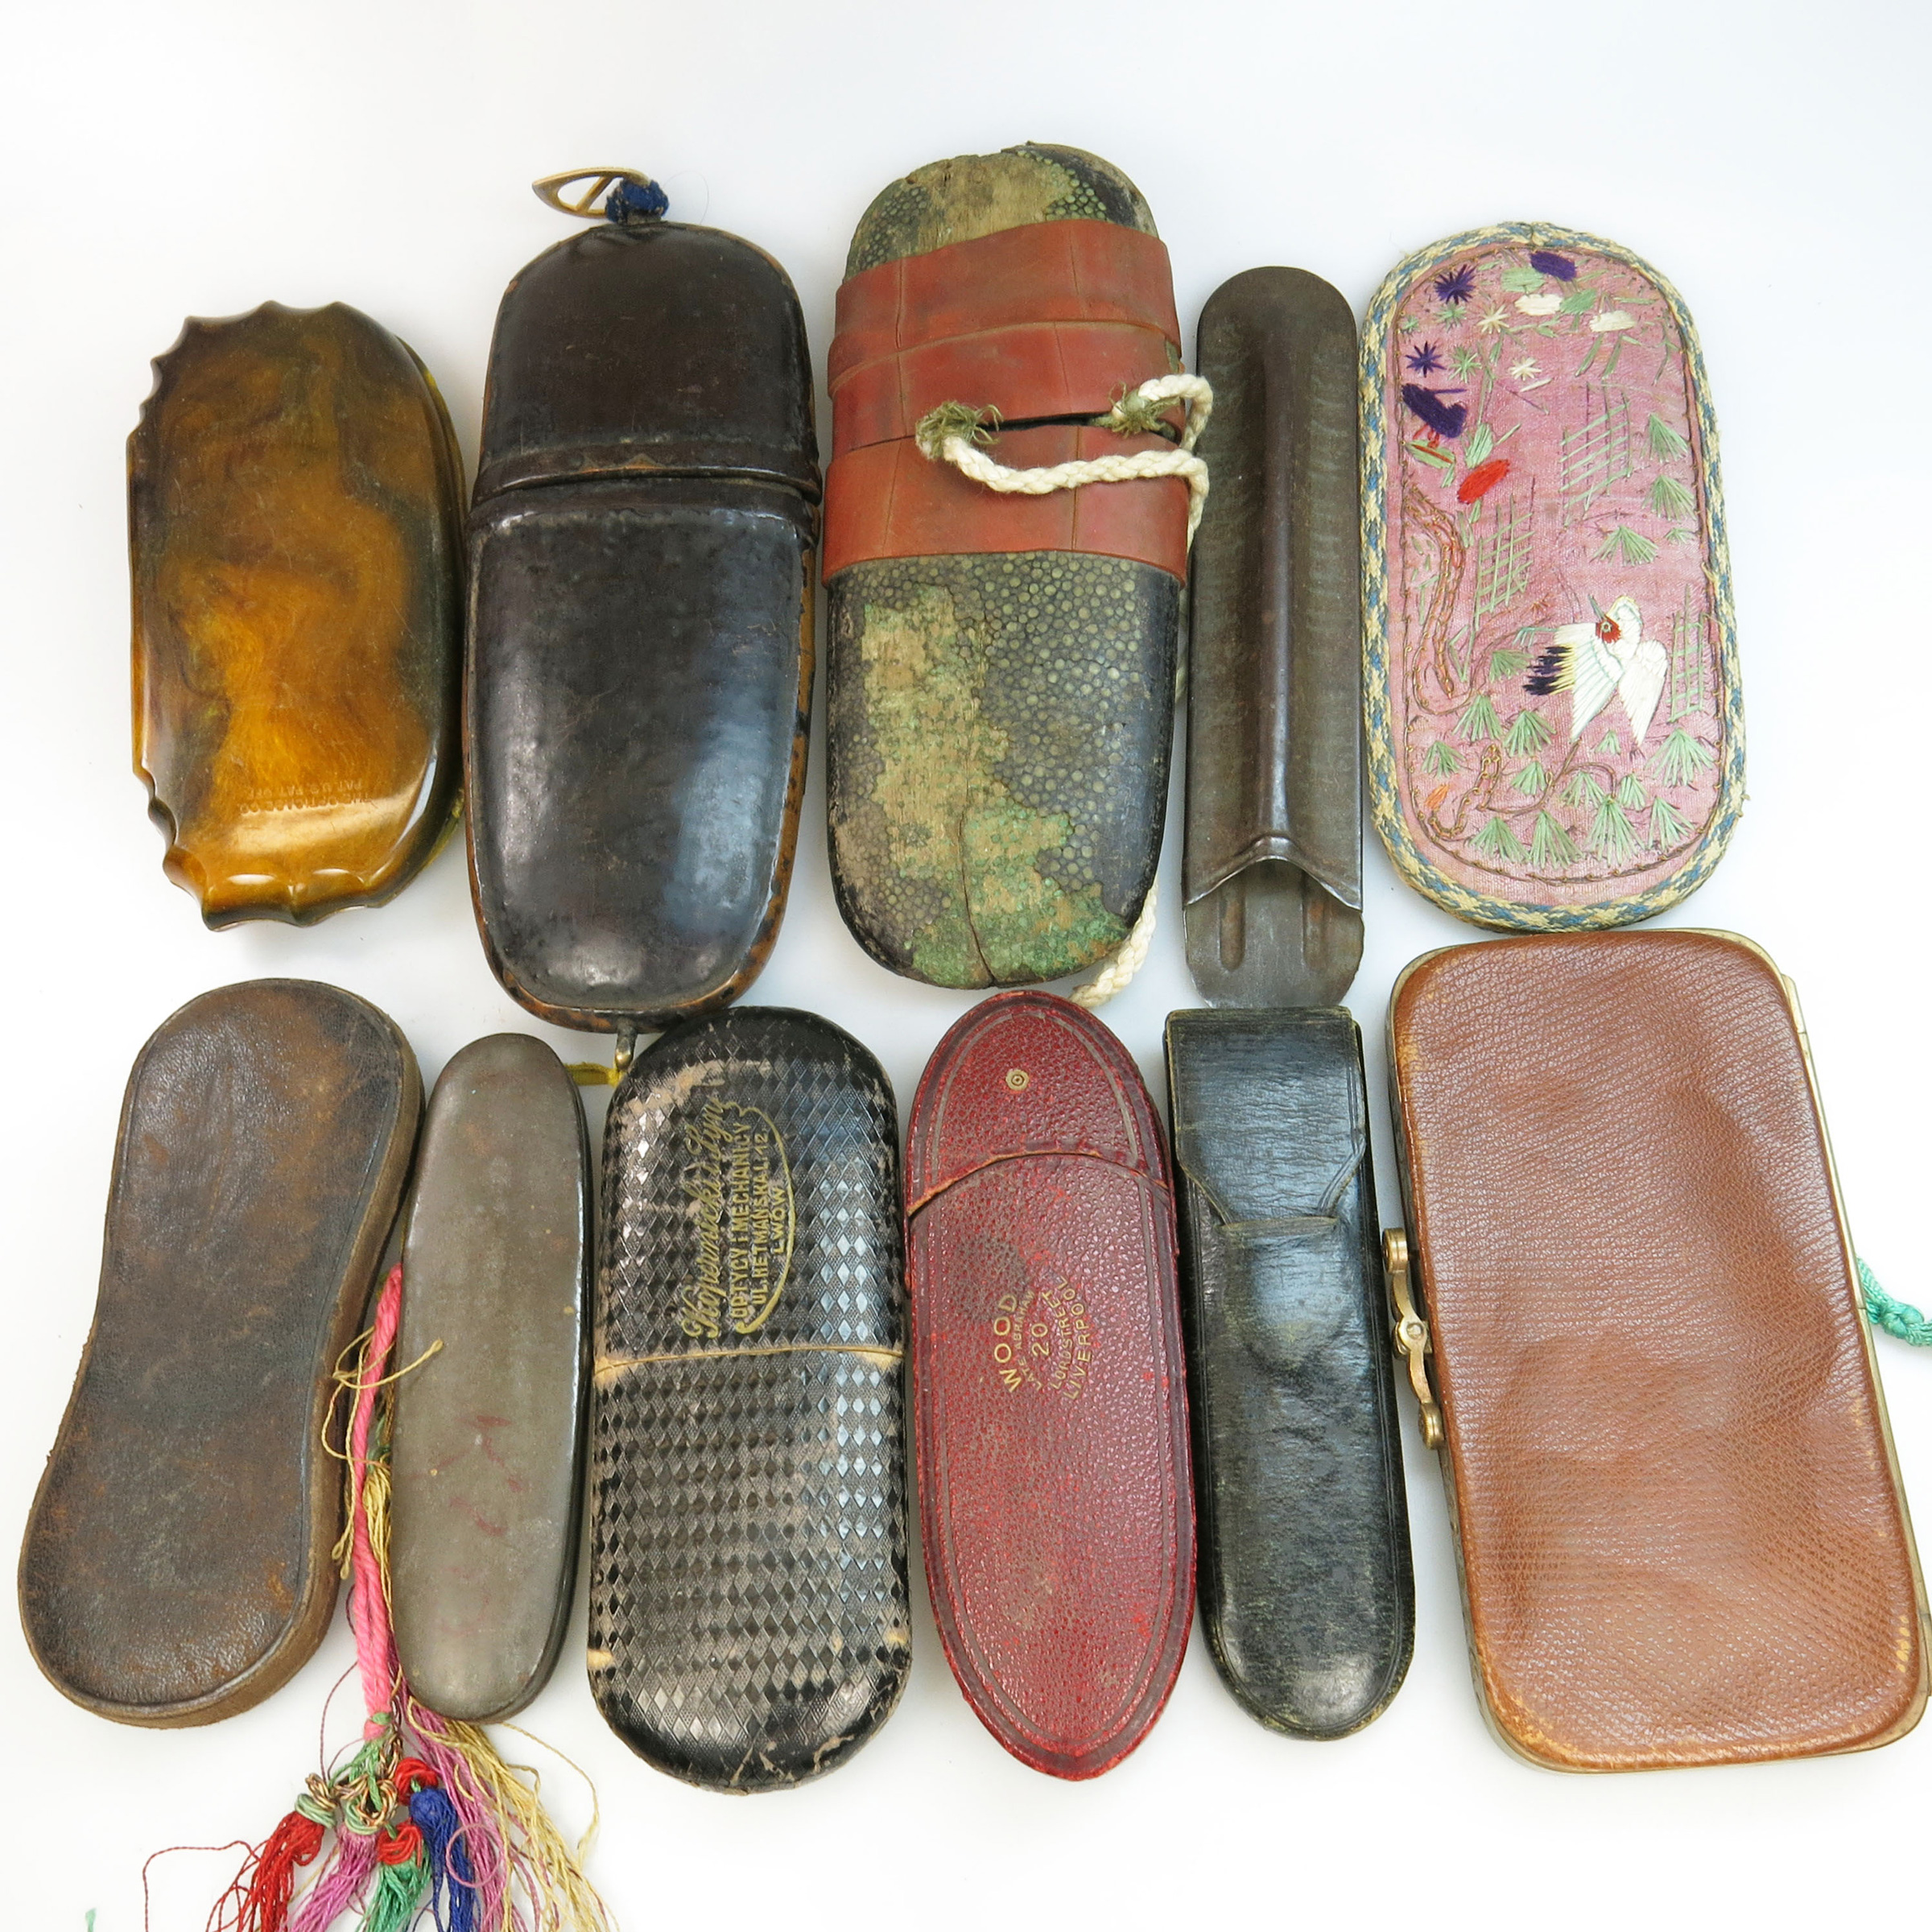 53 Various Spectacle Cases including examples in metal, wood, leather, shagreen, lacquer, and embroidered silk